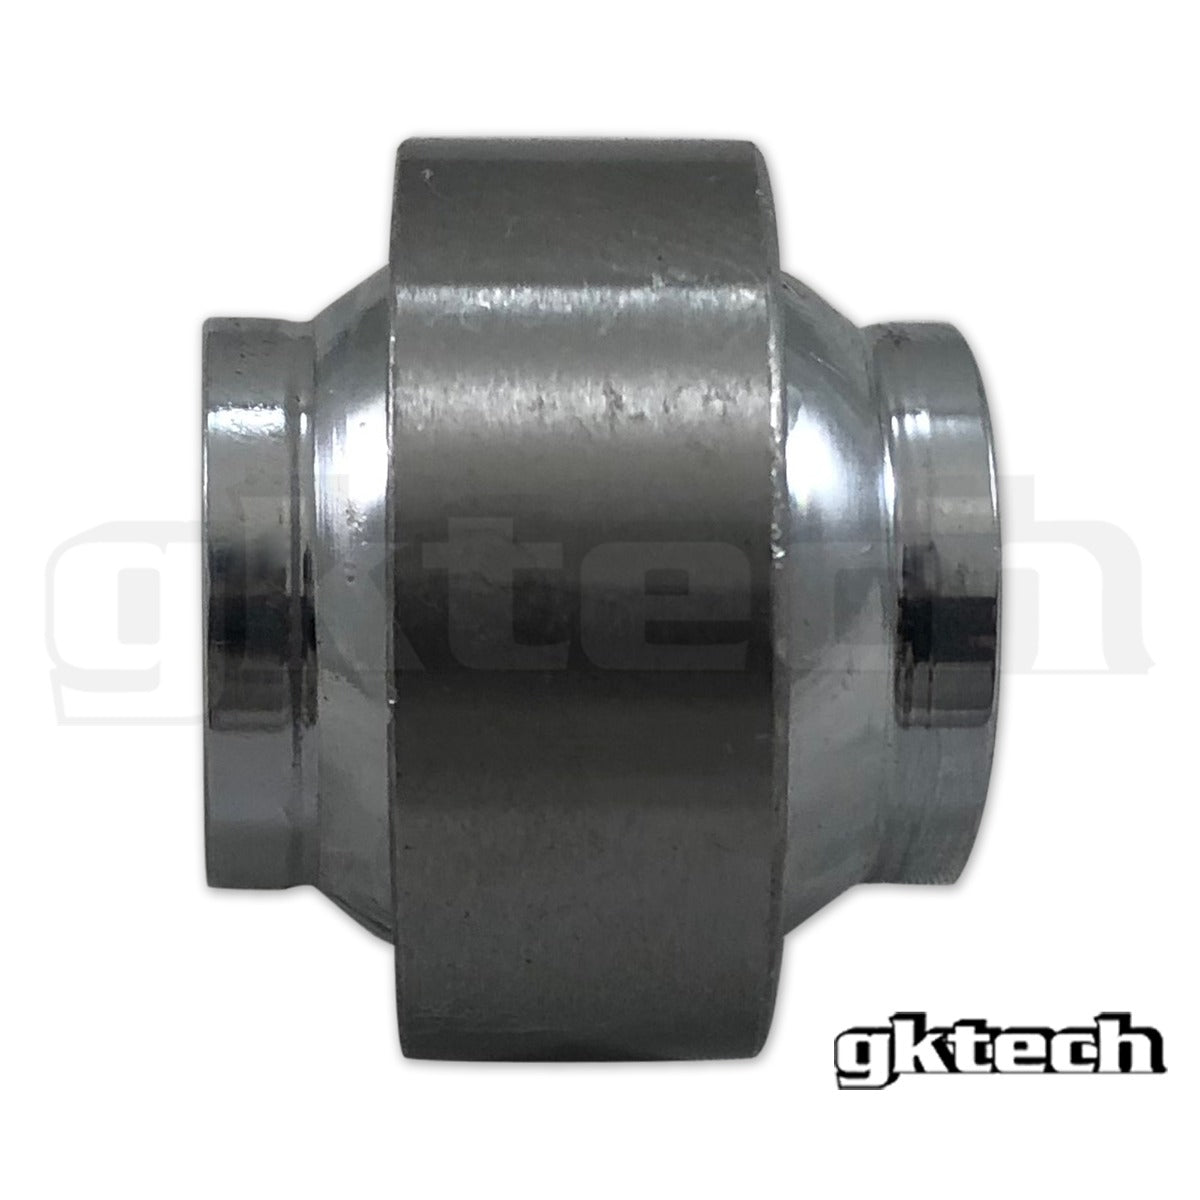 Replacement YPB6T Spherical bearing